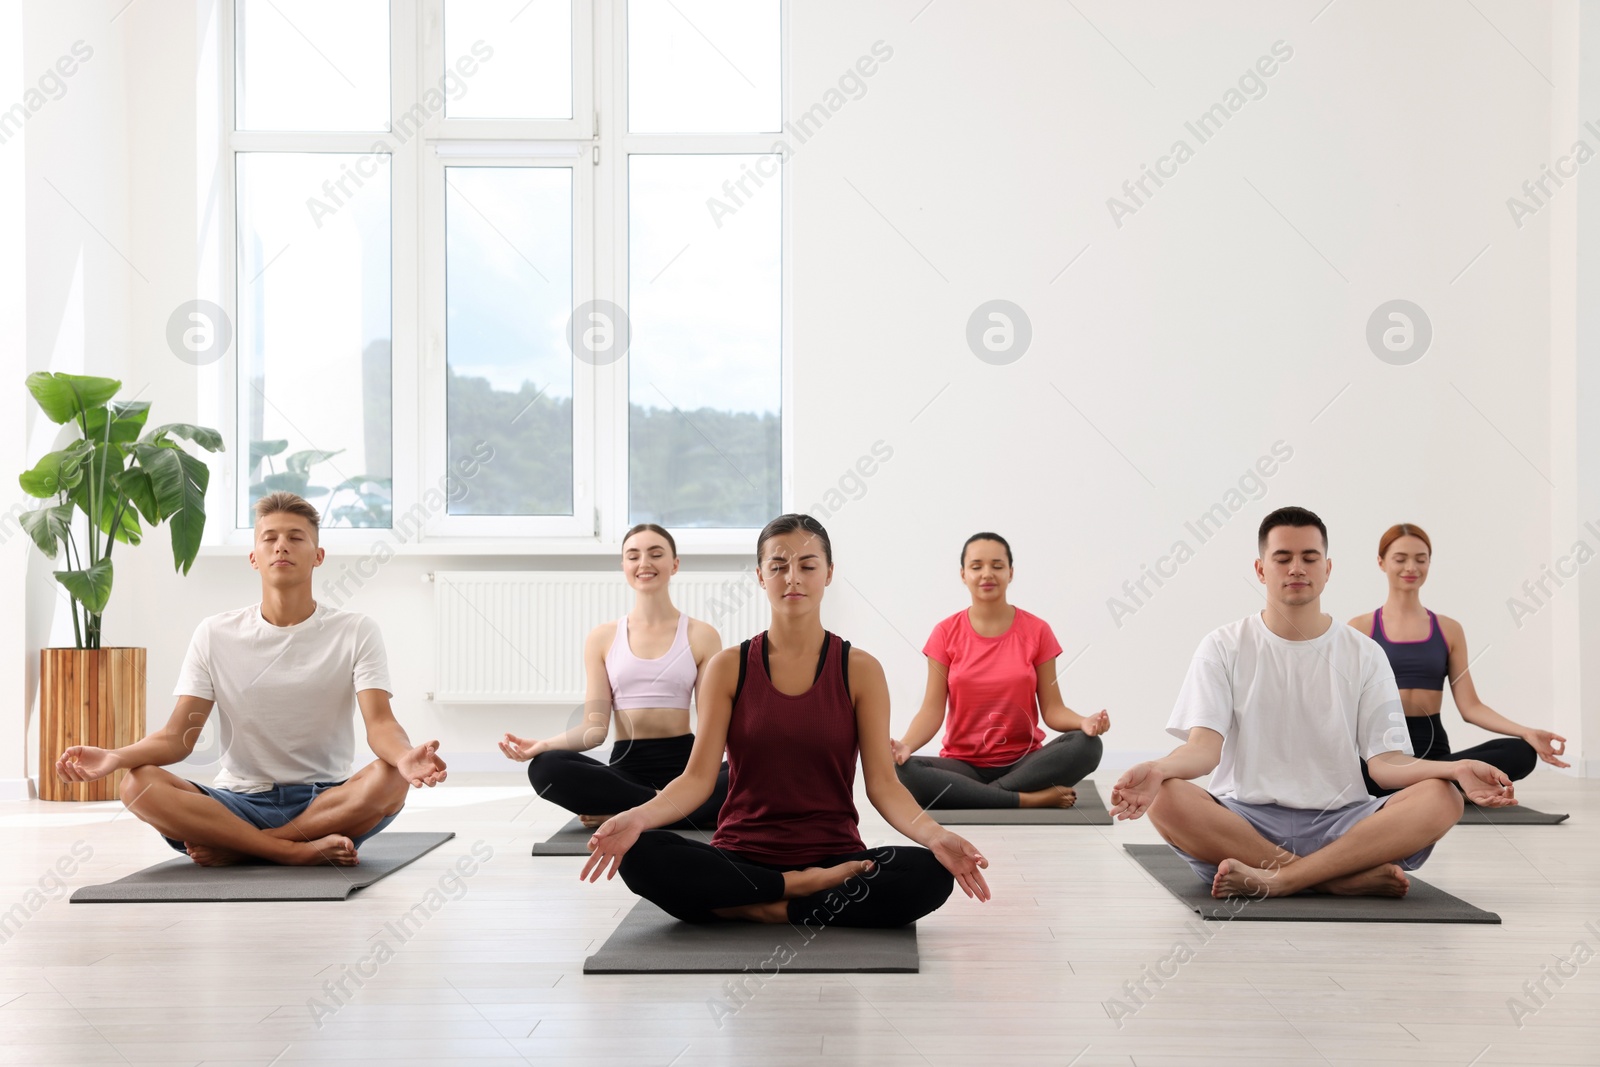 Photo of Group of people practicing yoga on mats indoors, space for text